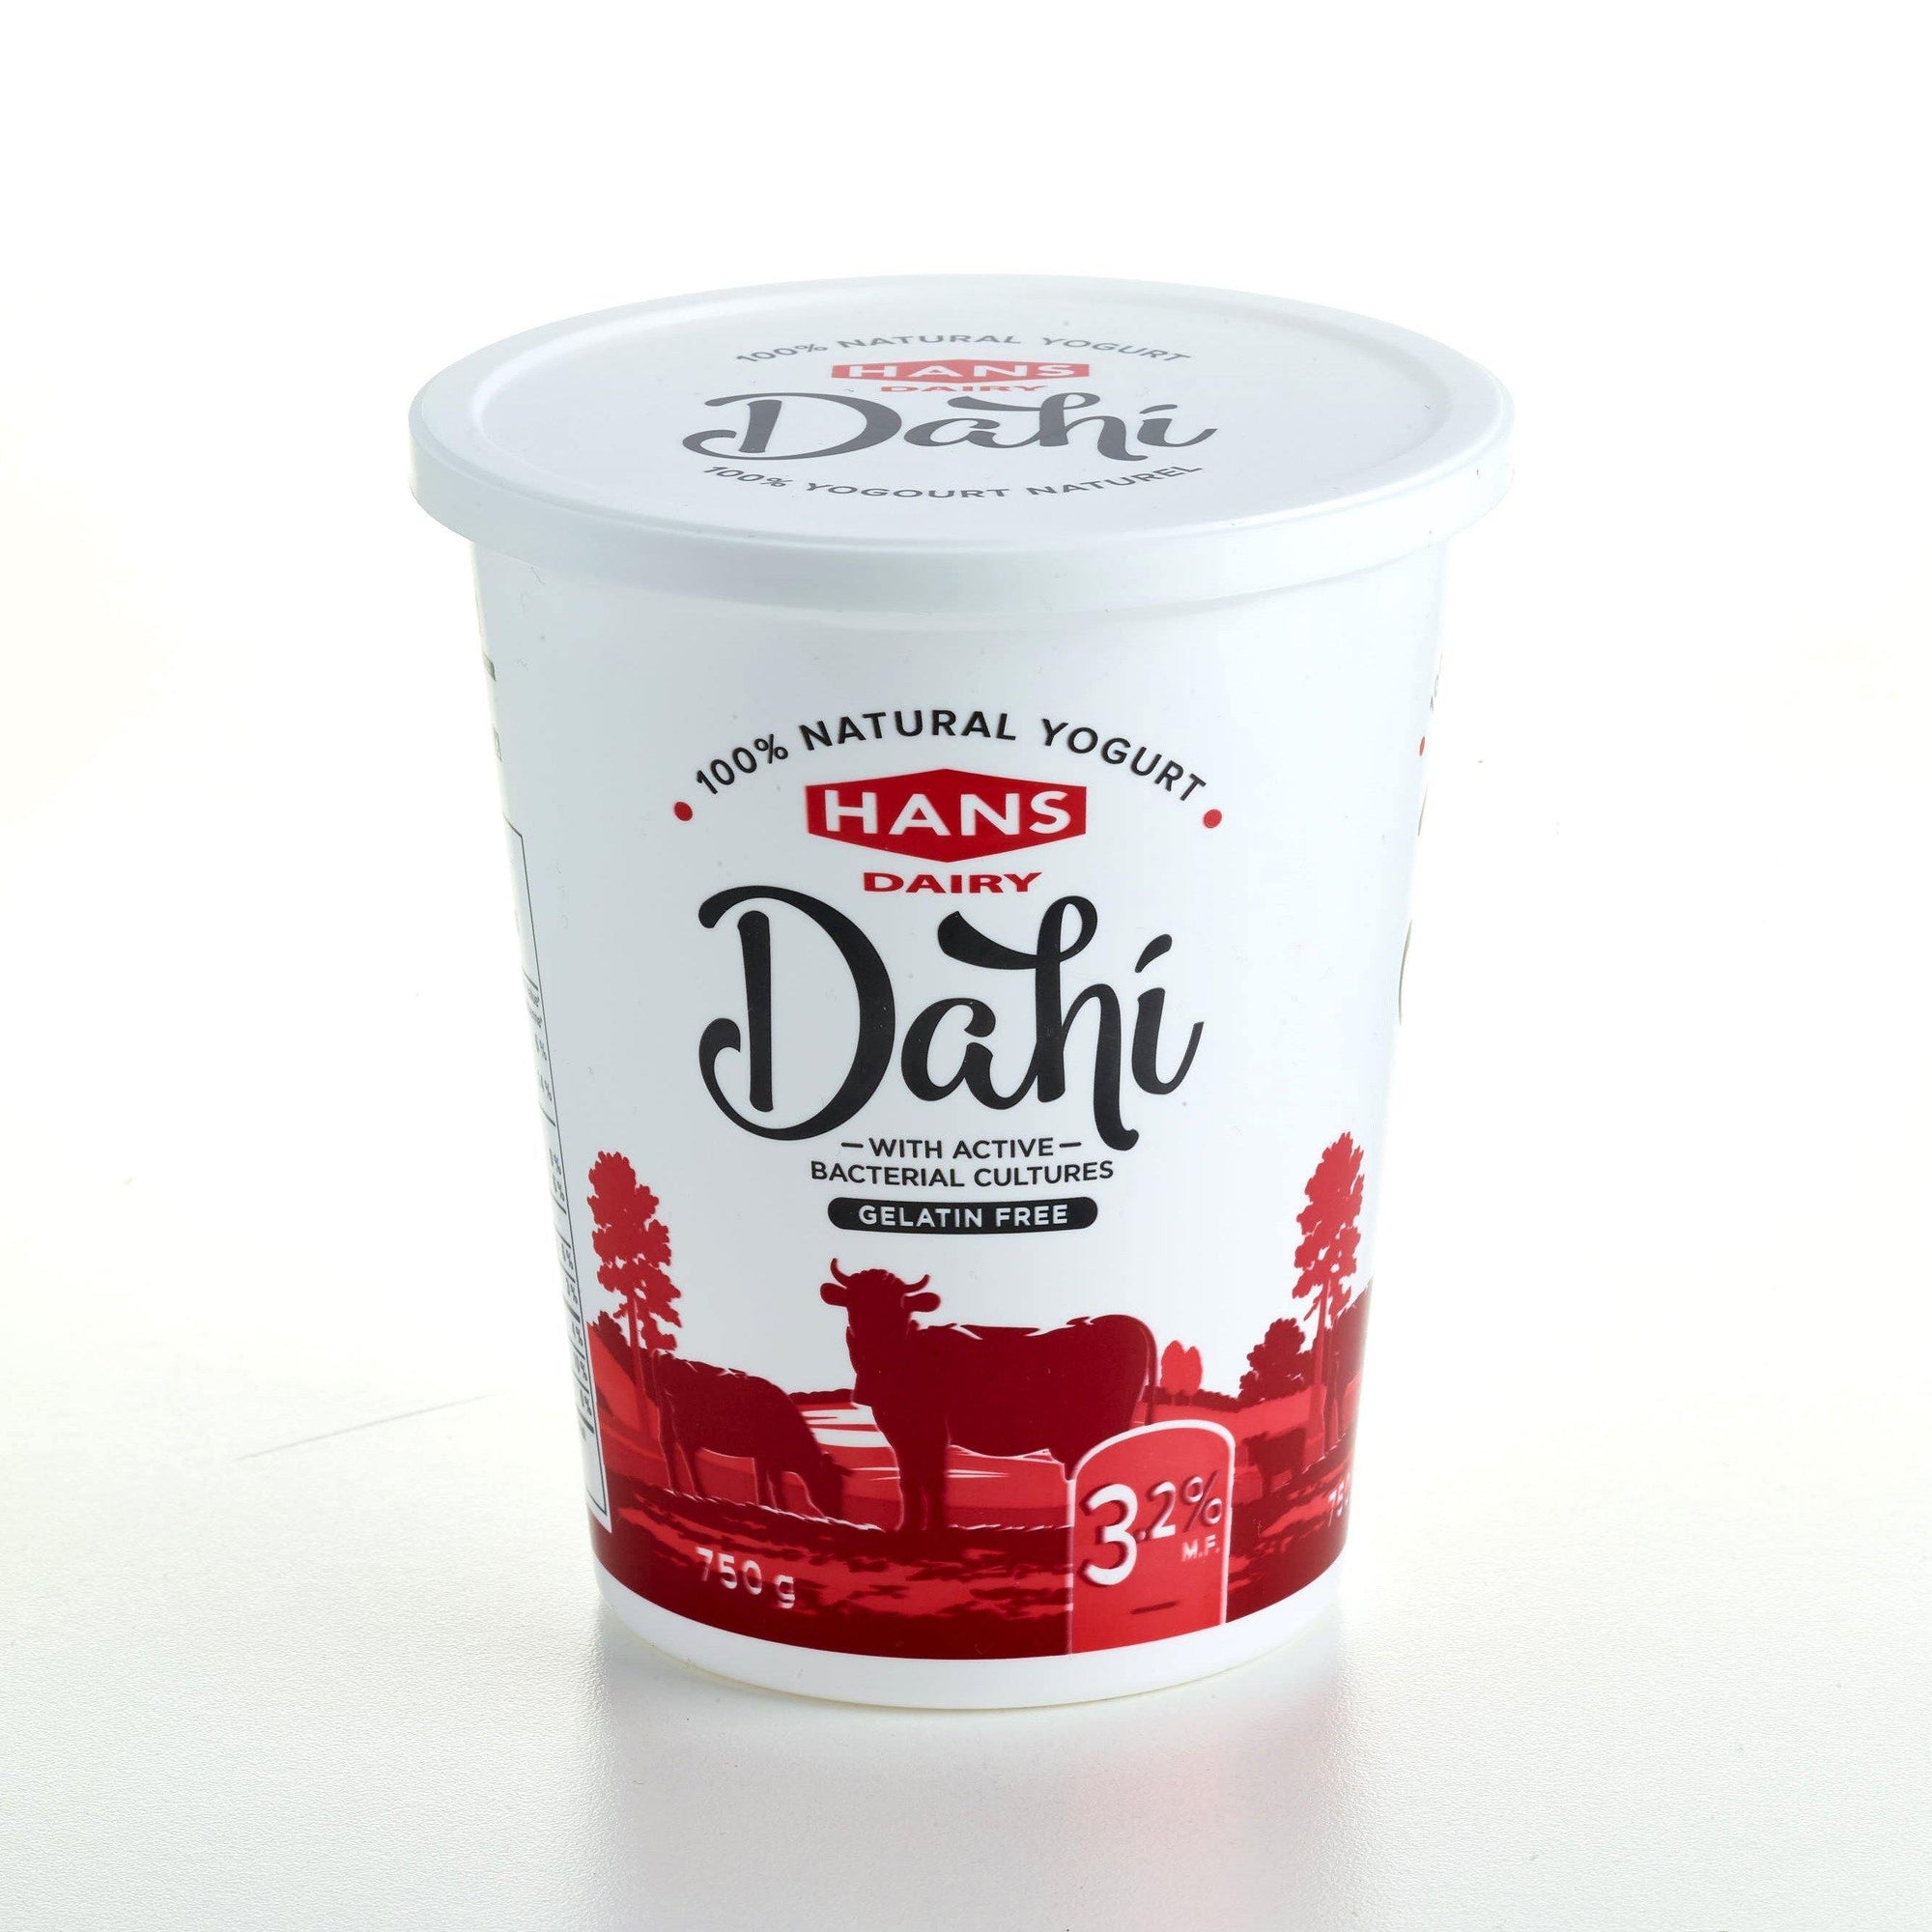 Hans Dahi 3.25% 750G - Cartly - Indian Grocery Store